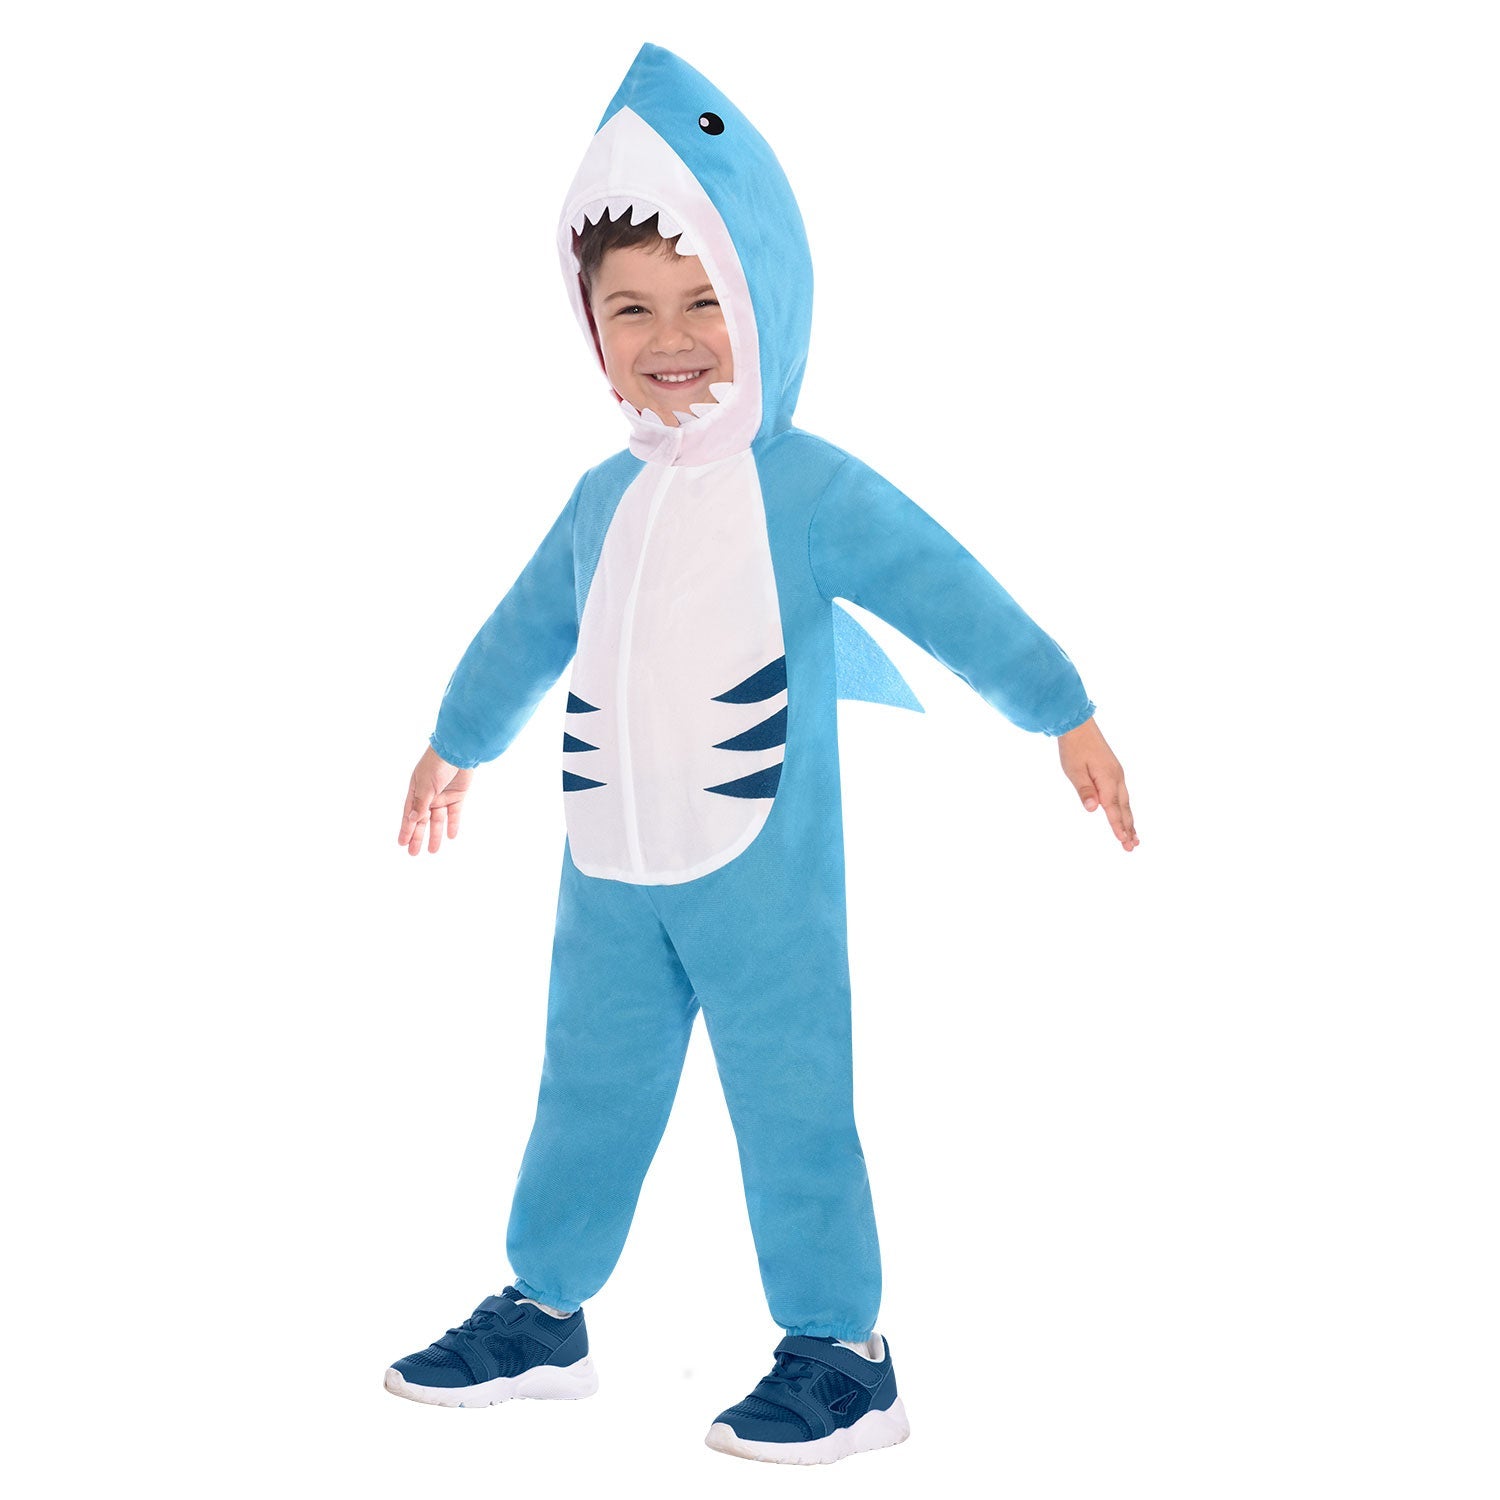 Great White Shark Costume includes jumpsuit with hood